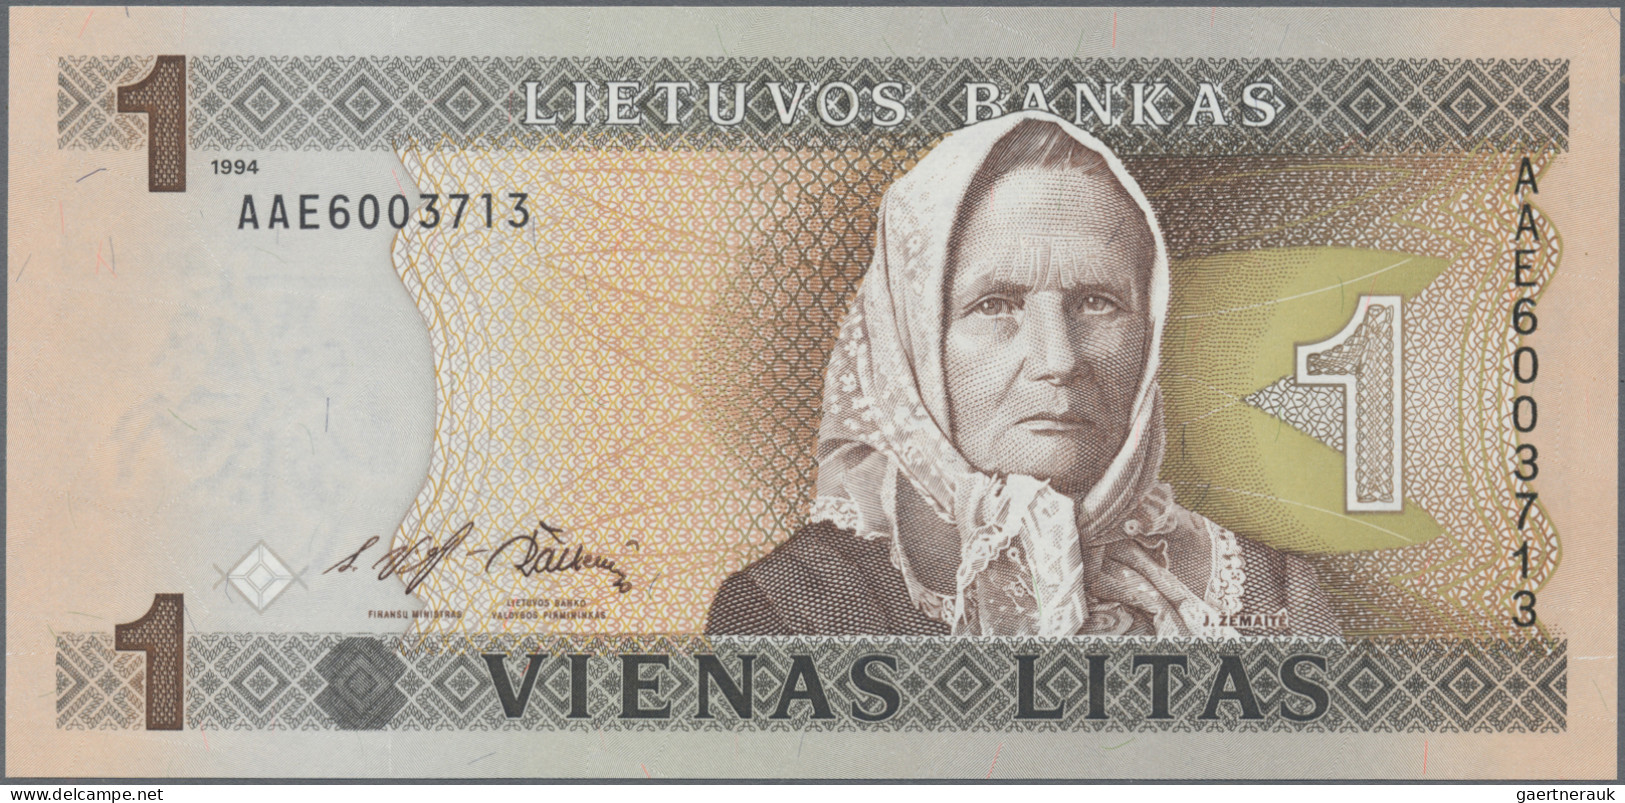 Lithuania: Lietuvos Bankas, Set With 5 Banknotes, Series 1993-1997, With 1, 2, 5 - Lithuania